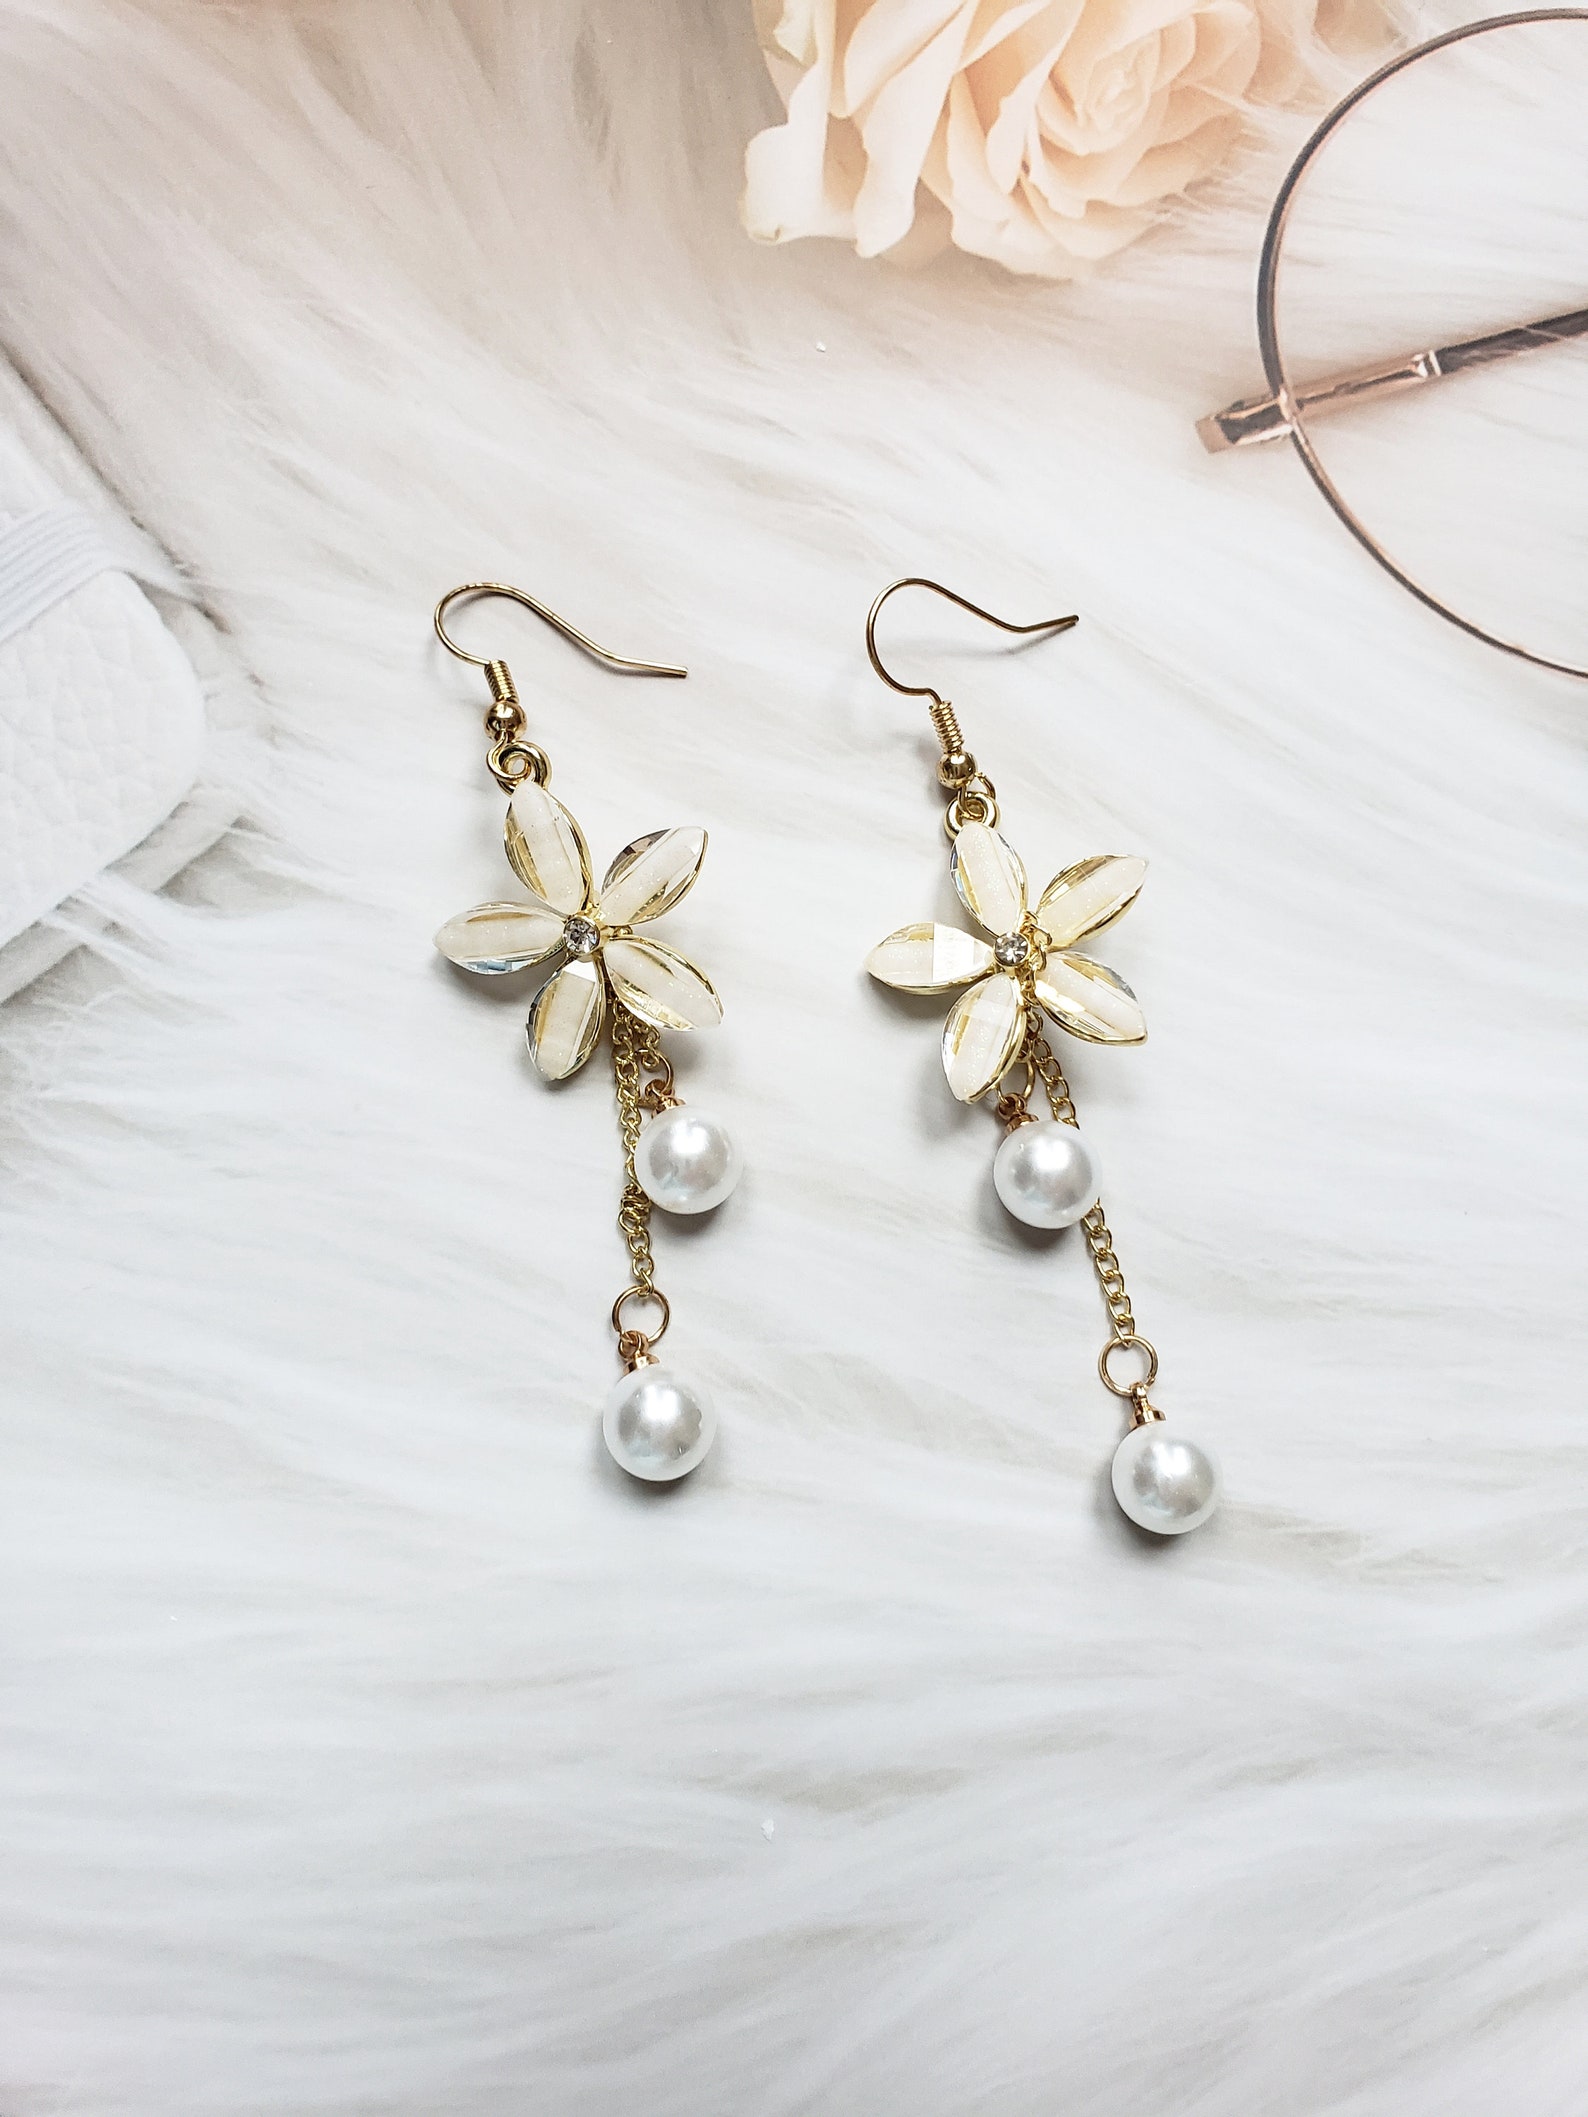 White Flower Dangle Drop Earrings Decorated With Pearls Elegant